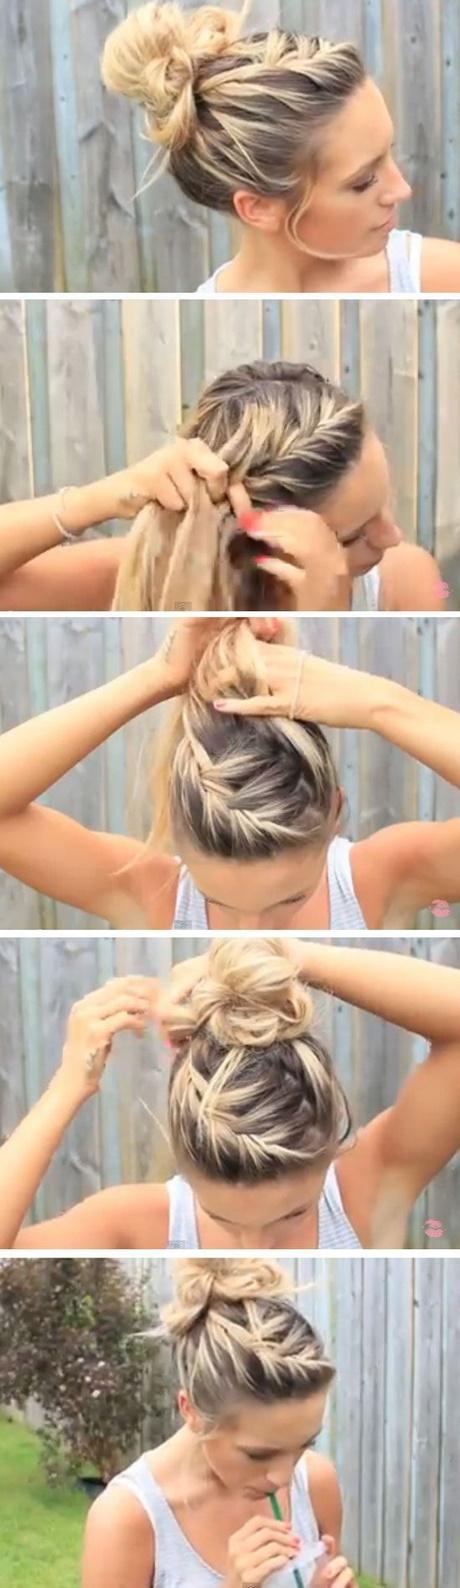 Quick cute easy hairstyles quick-cute-easy-hairstyles-74_4